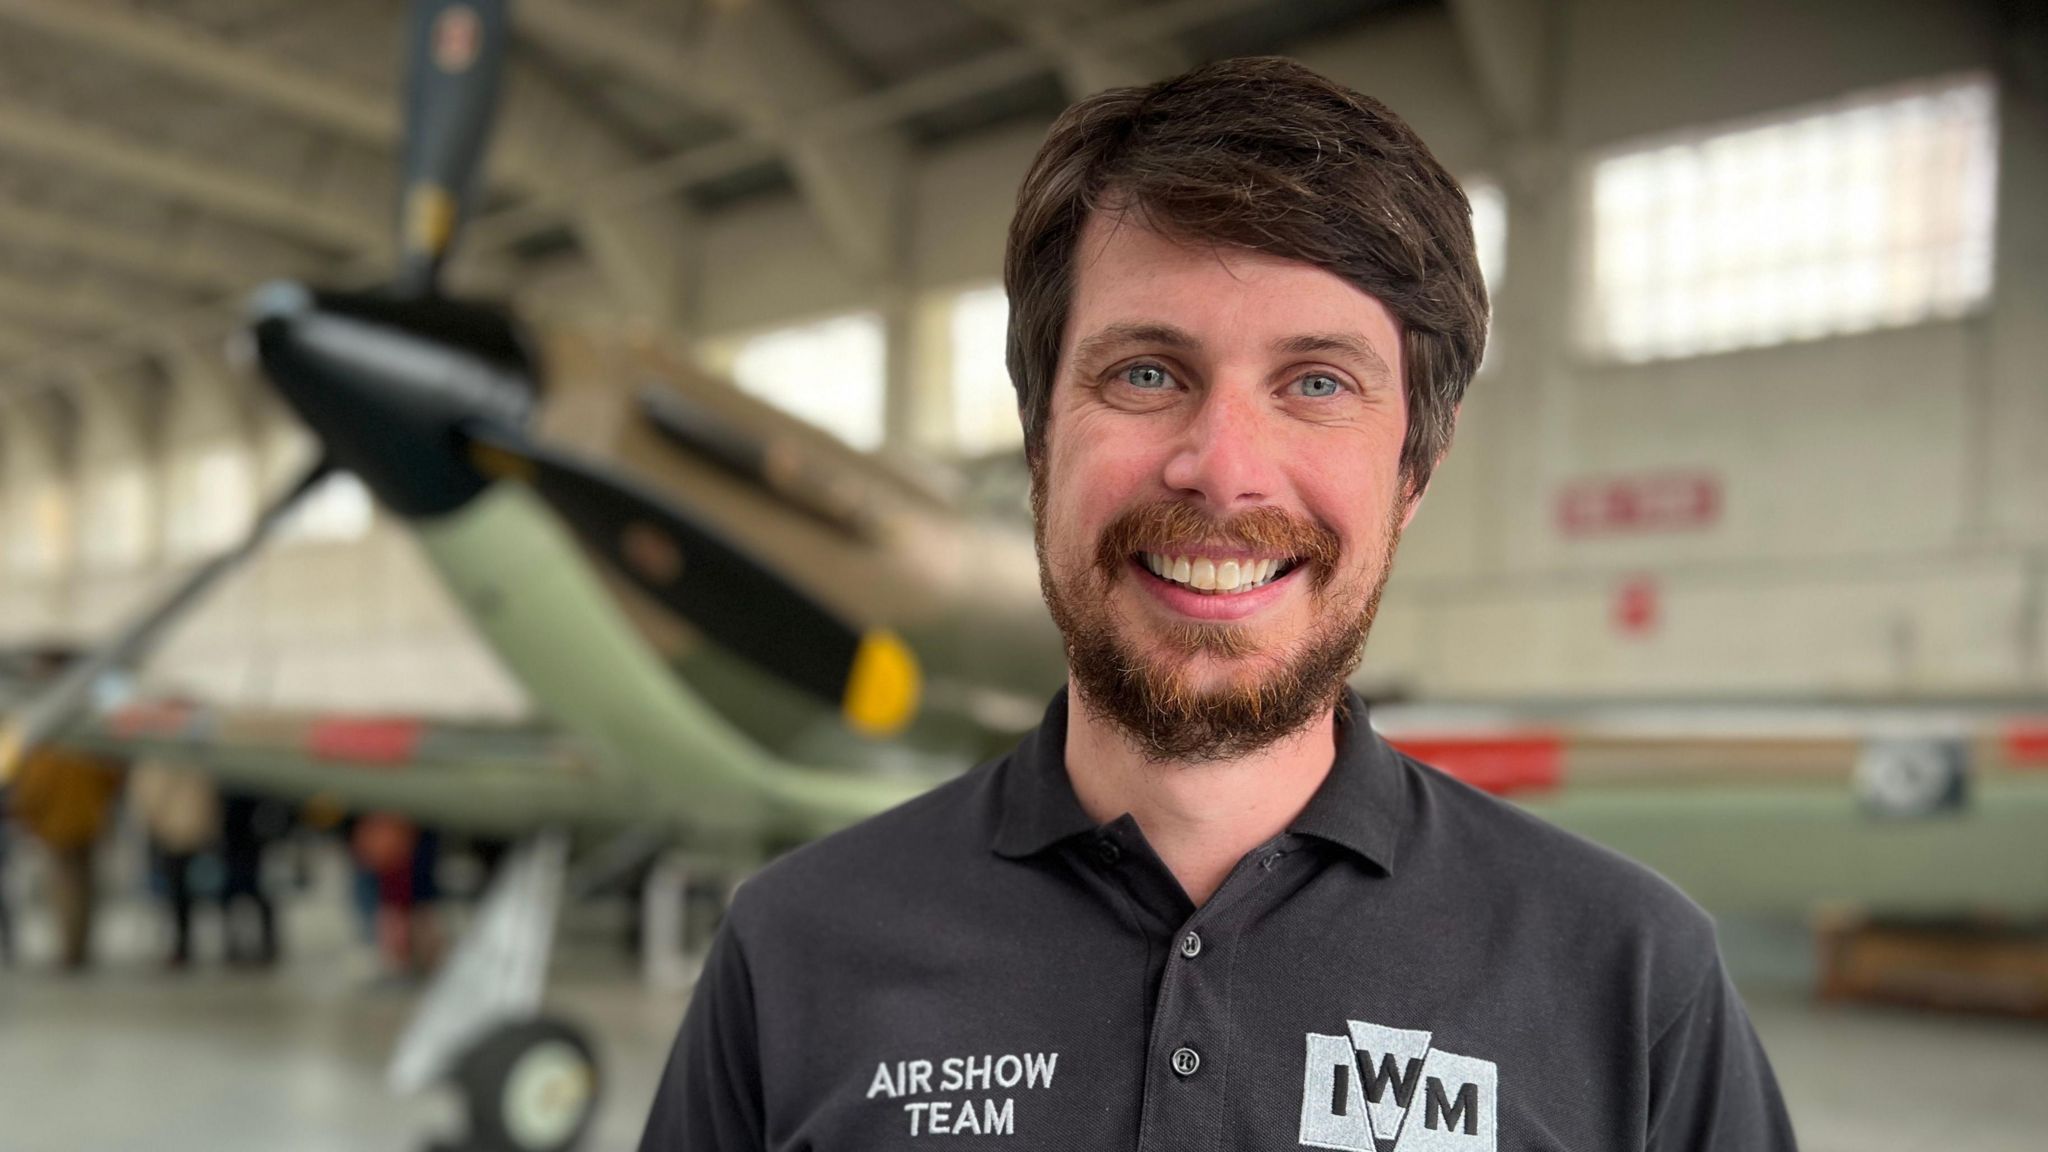 Phil Hood wearing a shirt saying Air Show Team and IWM in a museum hangar with an aircraft behind him